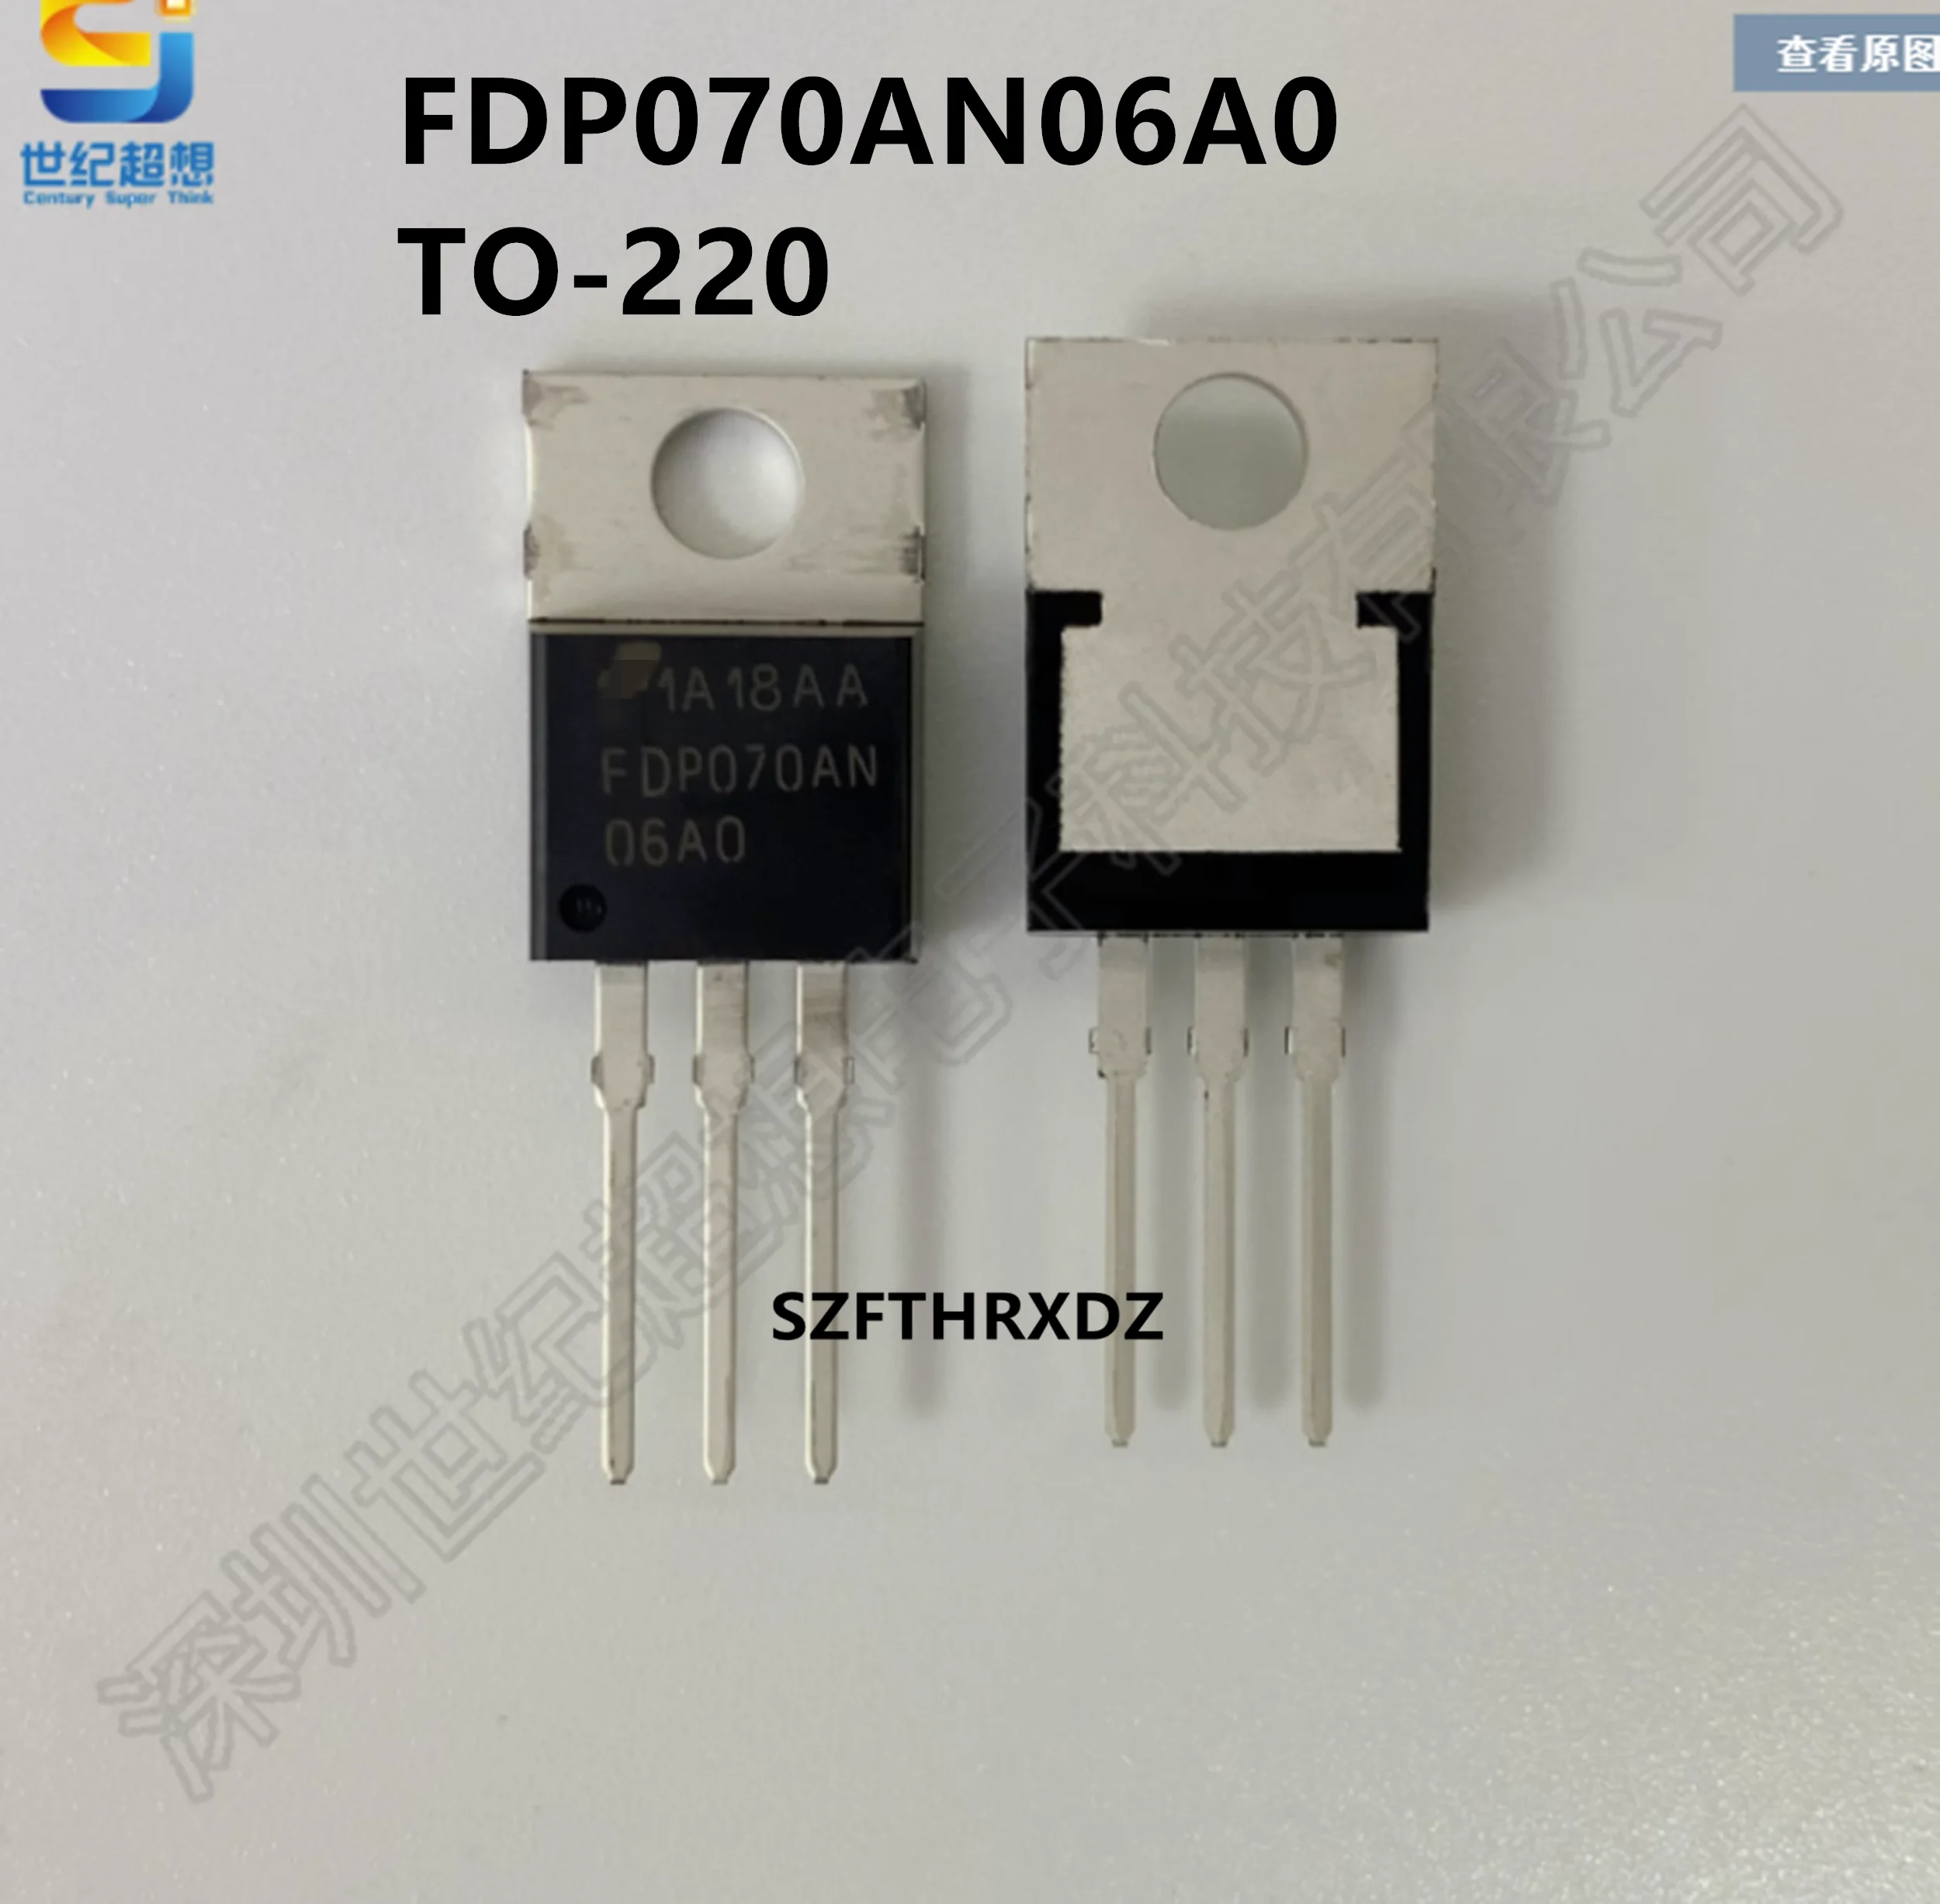 

10pcs 100% New Imported Original FDP070AN06A0 60V 80A TO220 Field effect transistor MOSFET N-channel